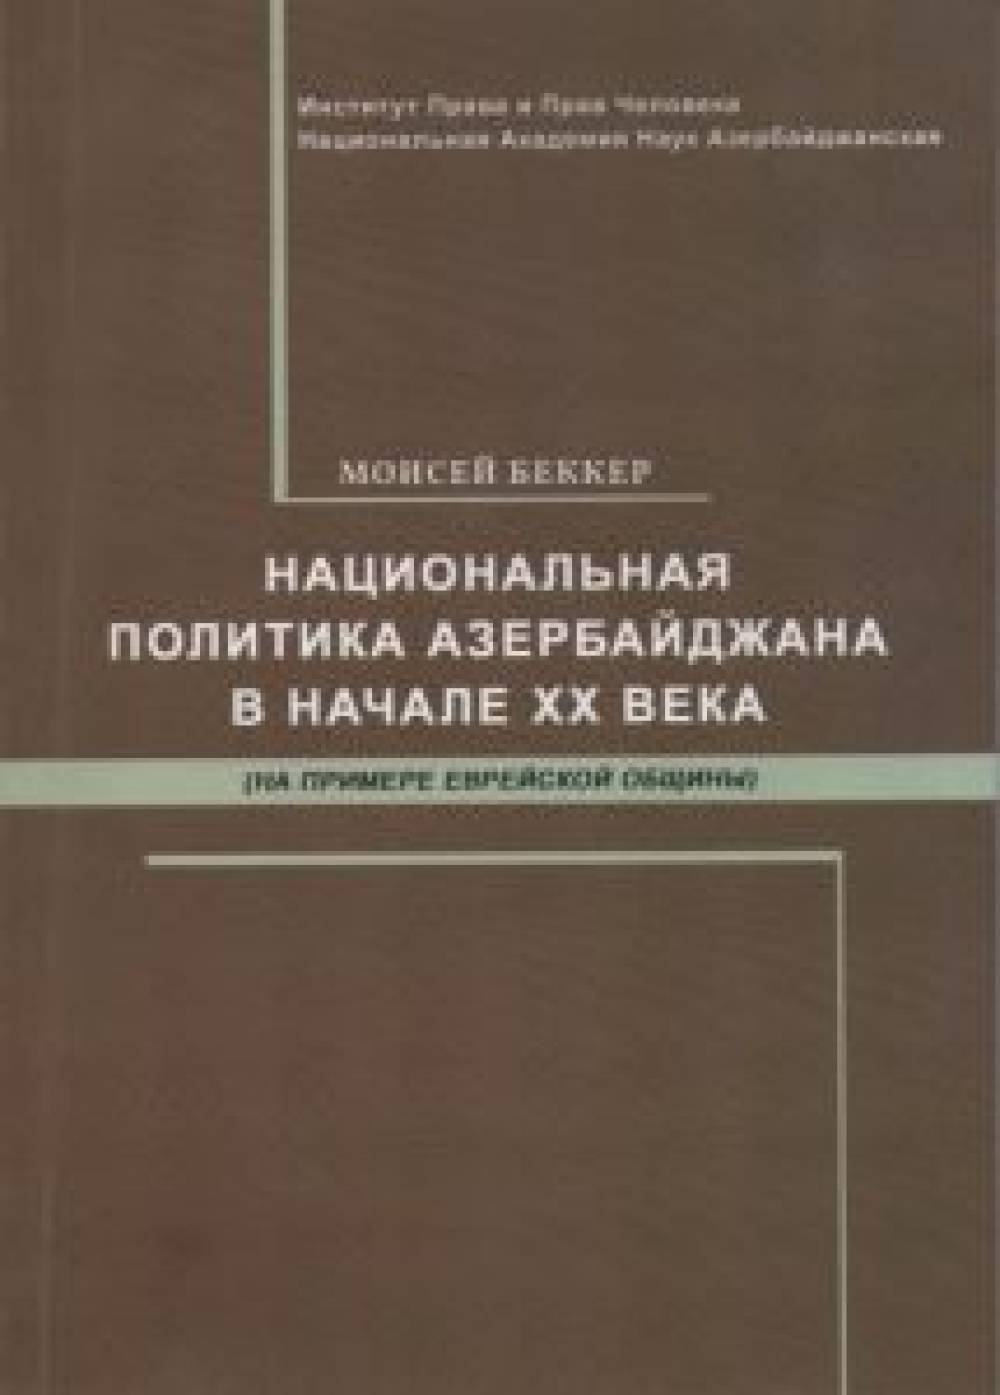 Moses Becker: The national policy of Azerbaijan in the early twentieth century (on the example of the Jewish community)